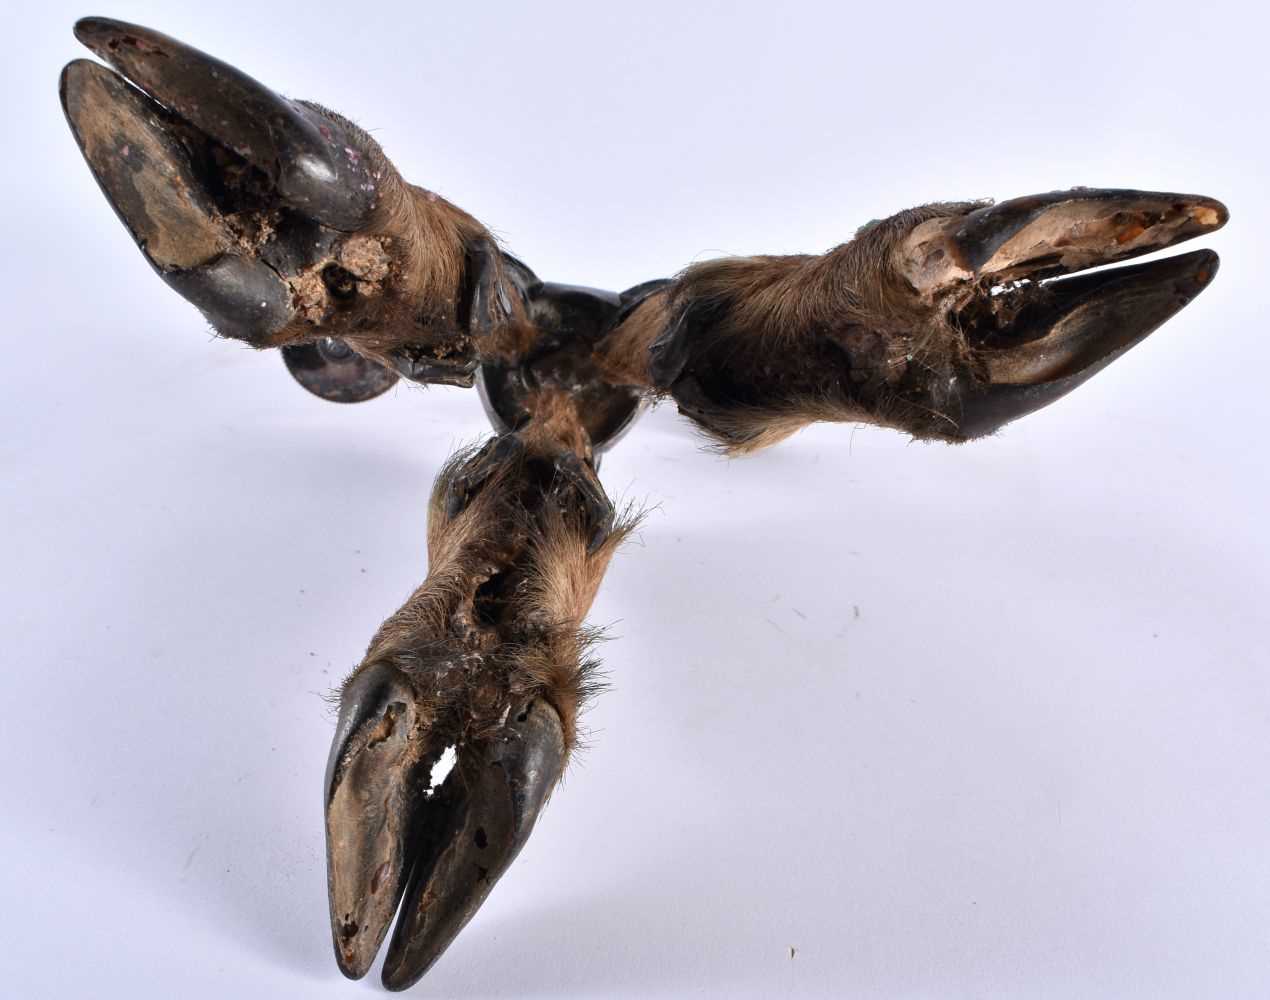 A RARE VICTORIAN TAXIDERMY ROWLAND WARD CANDLESTICK formed with three deer hooves. 32 cm x 16 cm. - Image 6 of 6